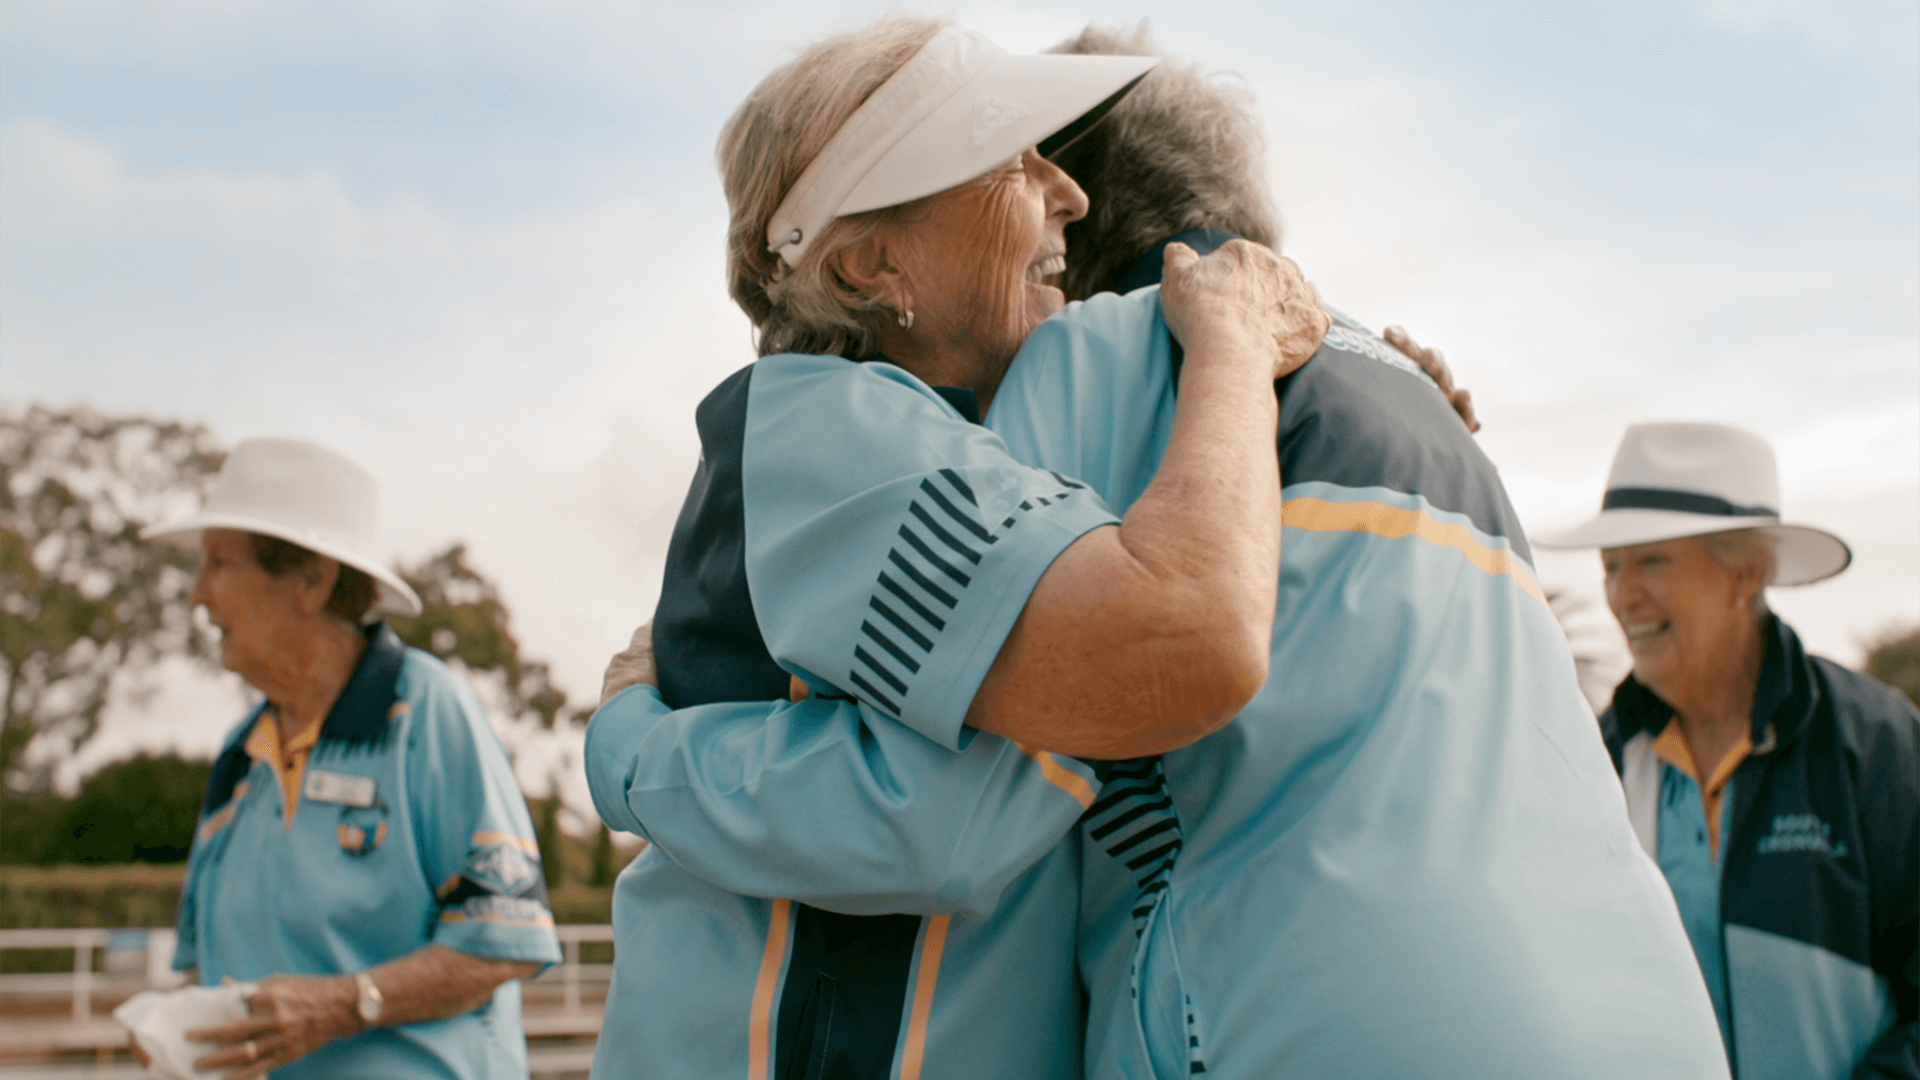 Still from the VANDAL produced World Vision commercial featuring two seniors hugging